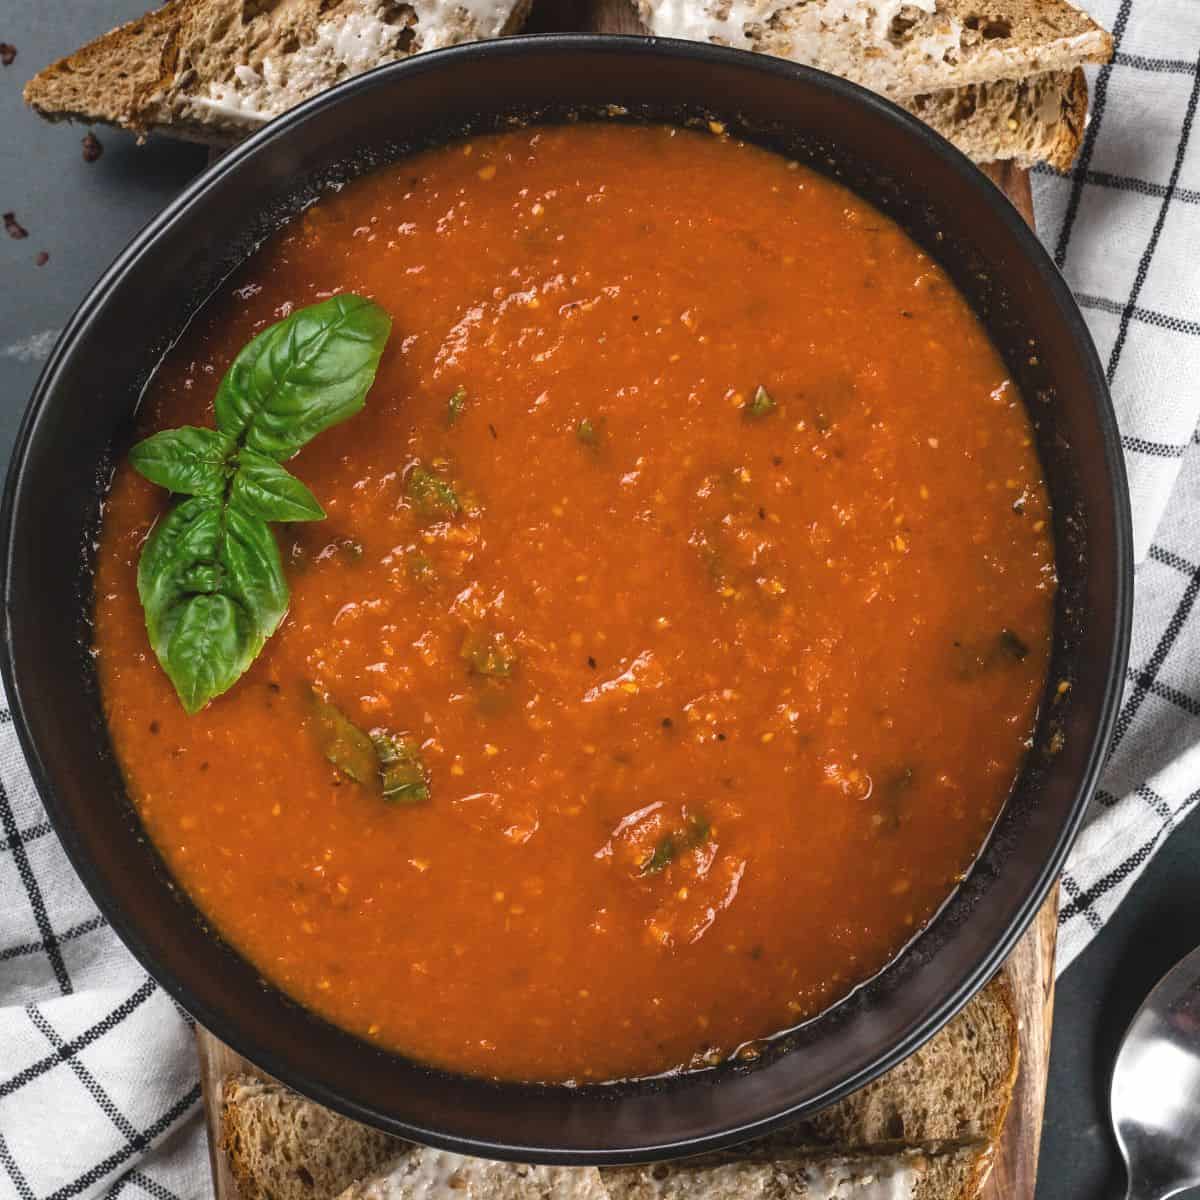 A big black bowl filled with roasted tomato basil soup. Fresh basil is sitting on top of the soup. A white and blue towel is under the bowl. Slices of hearty bread and butter are seen.